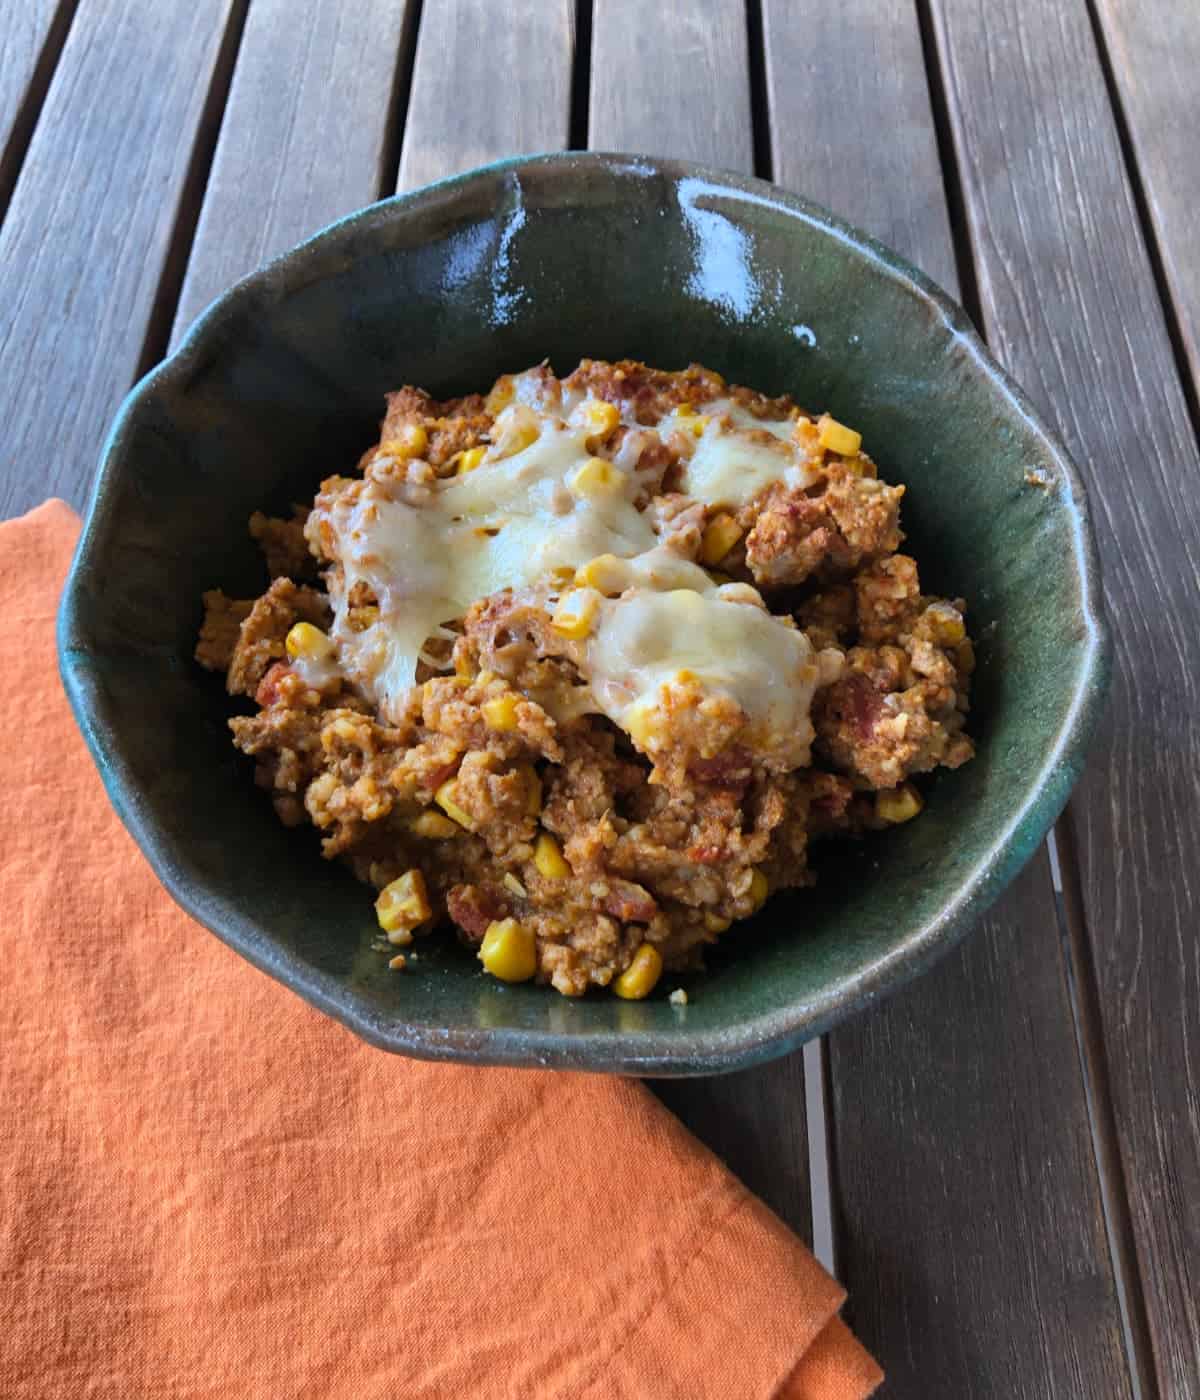 Slow cooker tamale pie in green ceramic bowl with orange napkin on wooden table.